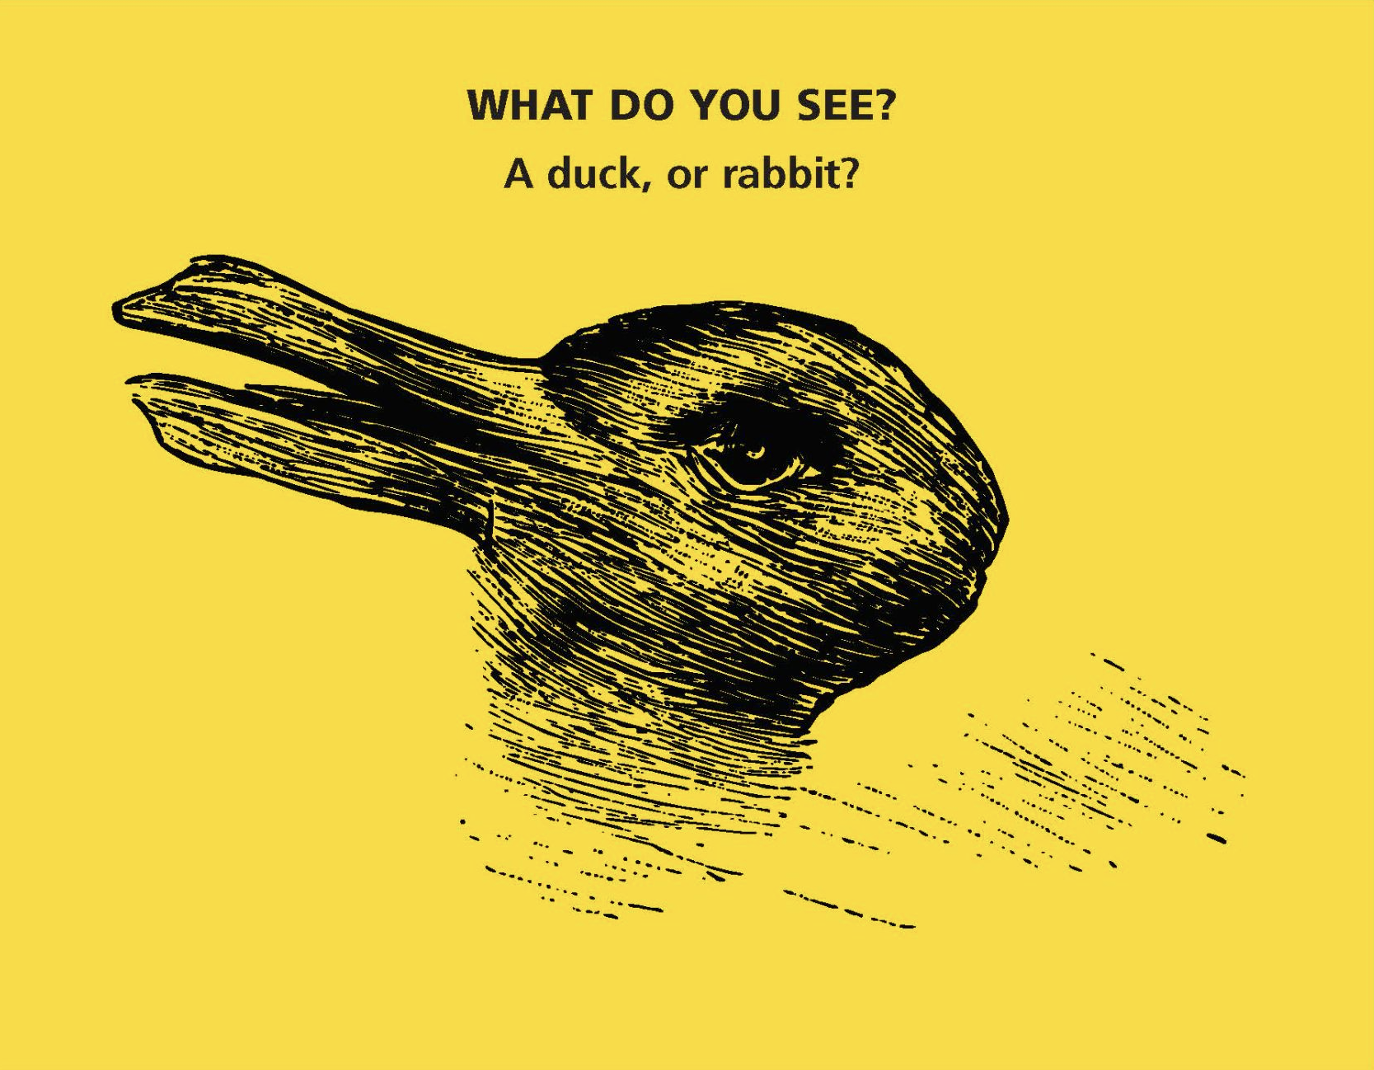 Image of a drawing that can be perceived as a duck or a rabbit